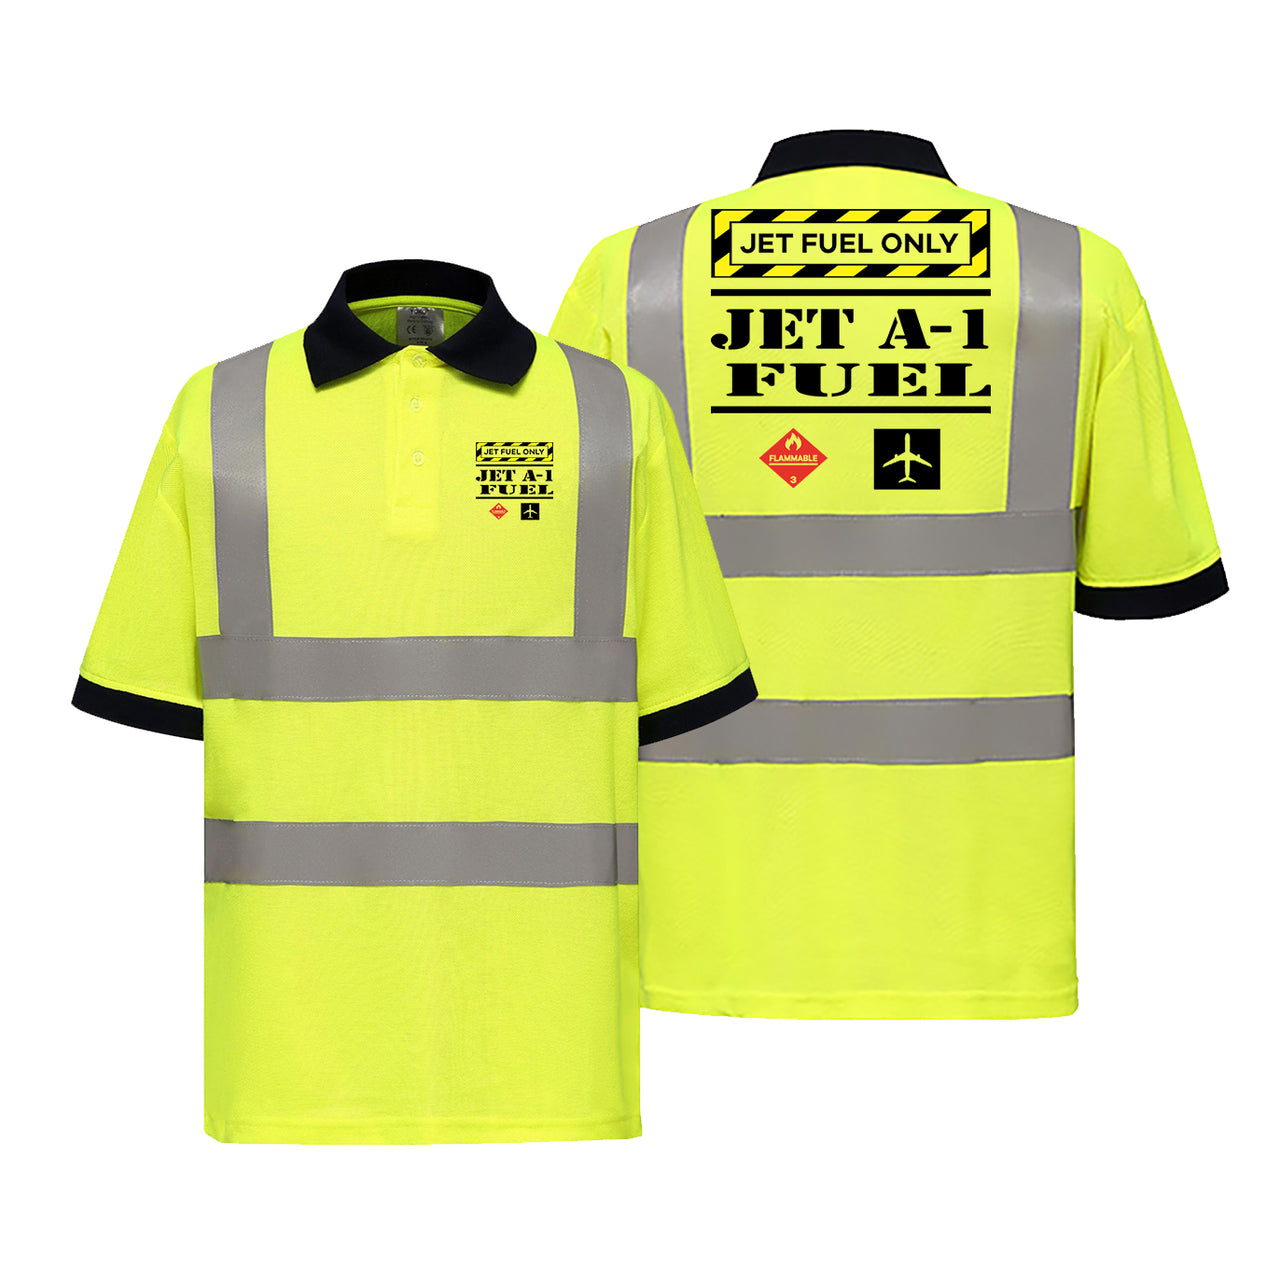 Jet Fuel Only Designed Reflective Polo T-Shirts